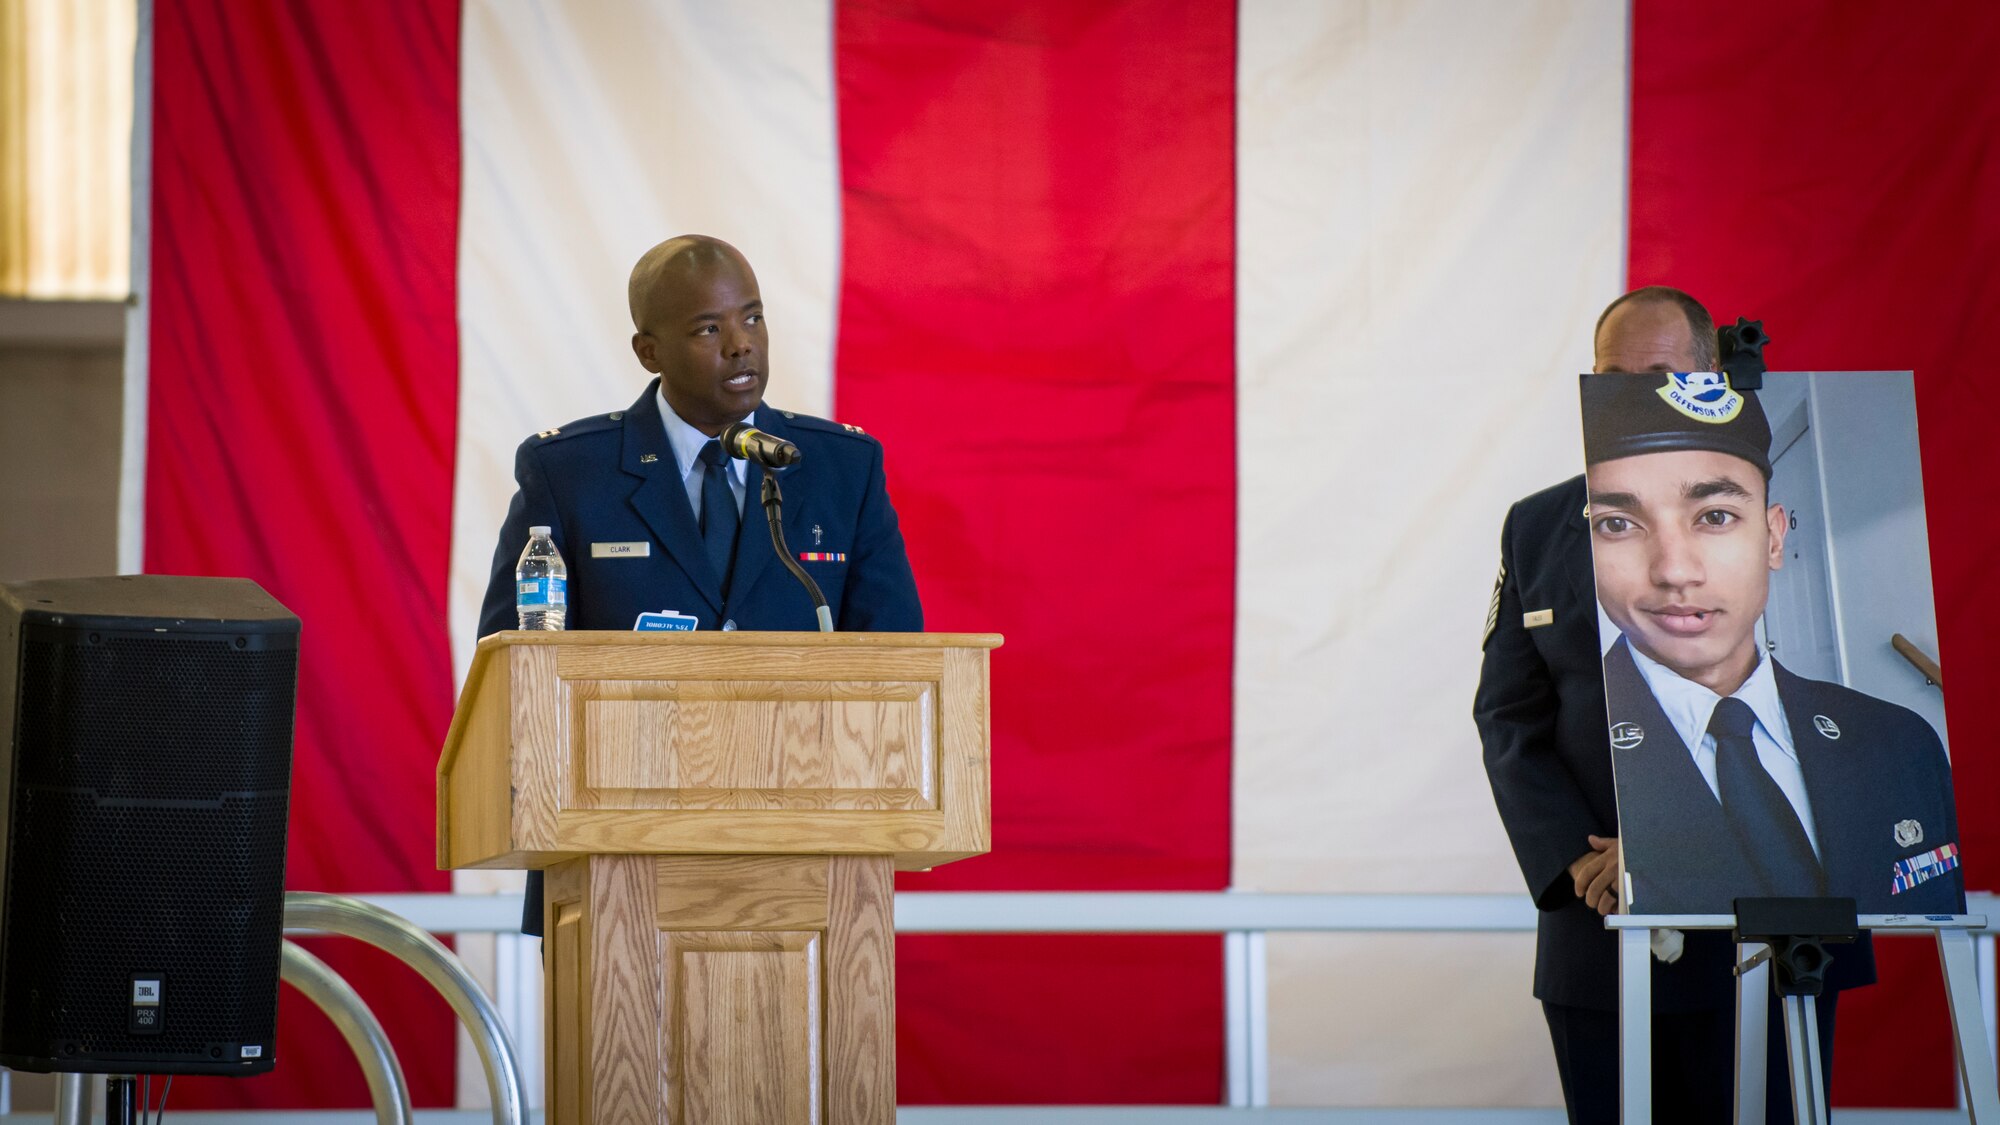 Chaplain, Capt. Jay Clark provides his remarks during a memorial service for three Security Forces members lost this year at Edwards Air Force Base, California, Aug. 3. (Air Force photo by Giancarlo Casem)